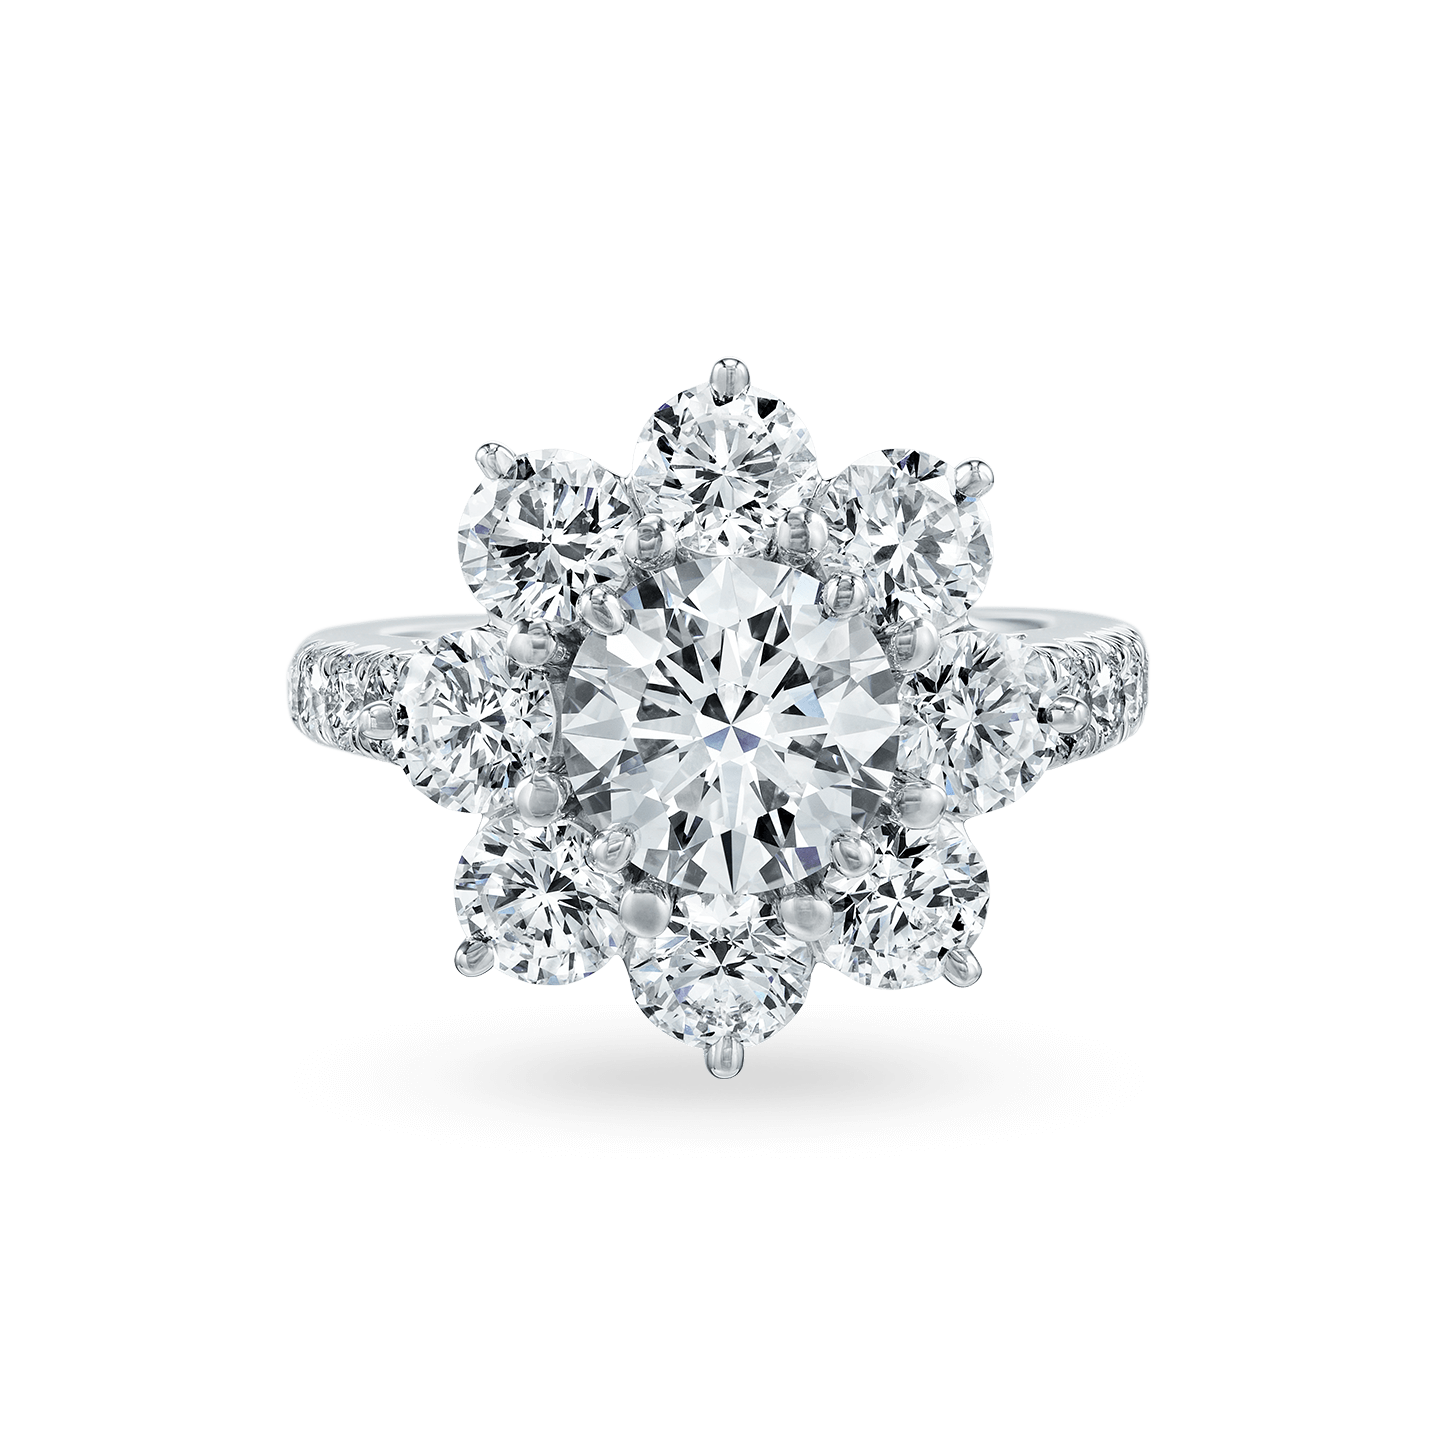 Engaged With Harry Winston | Prestige Online - Thailand